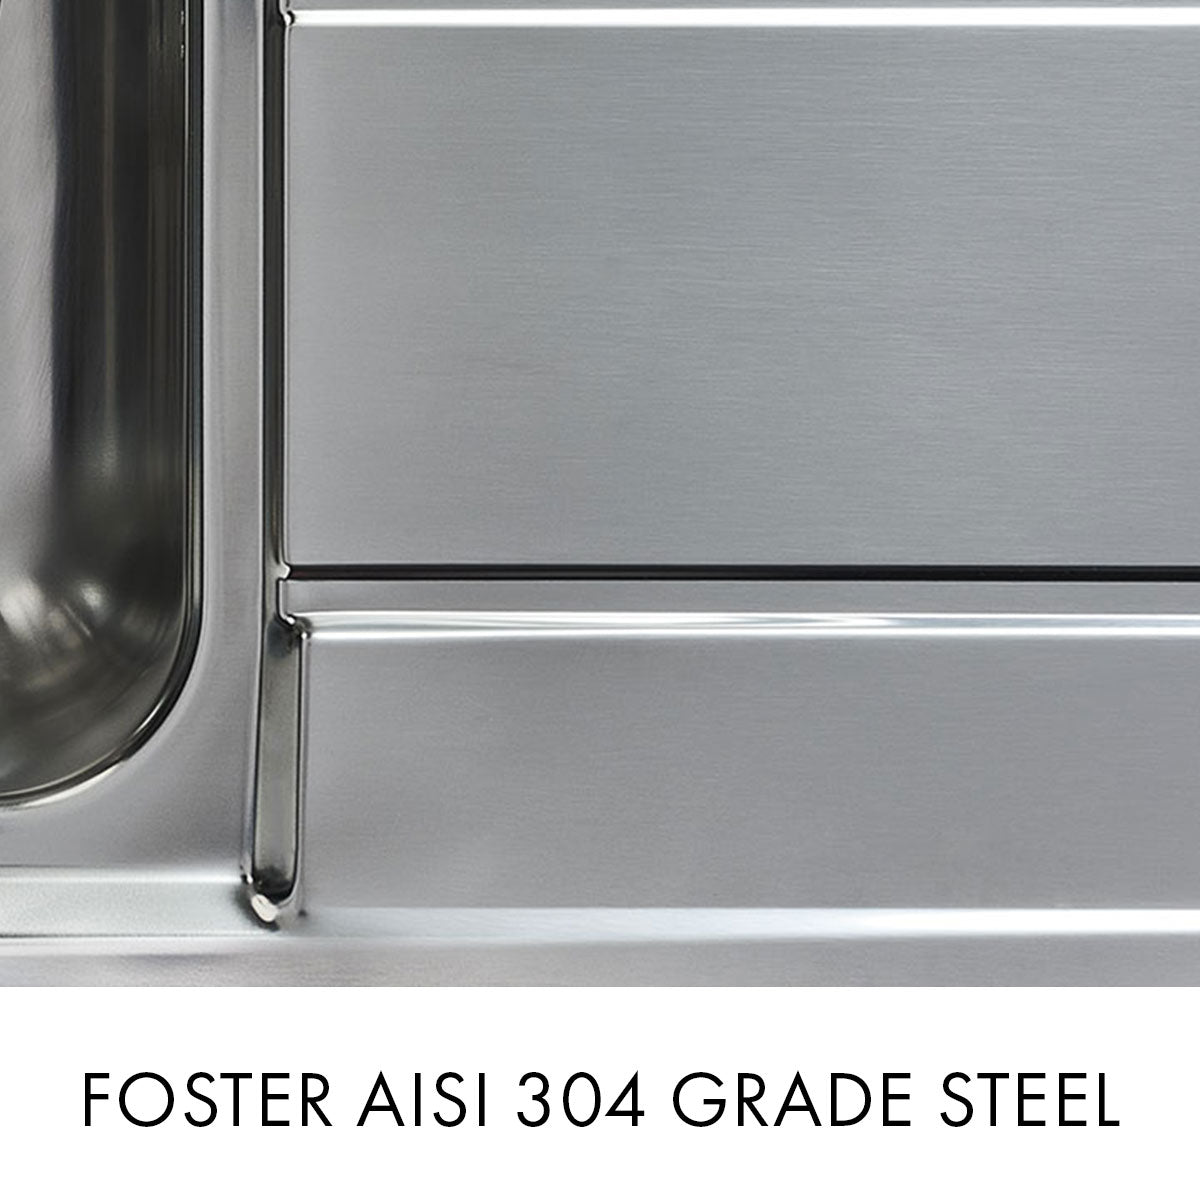 Foster S1000 Double Bowl Kitchen Sink - Brushed Stainless Steel